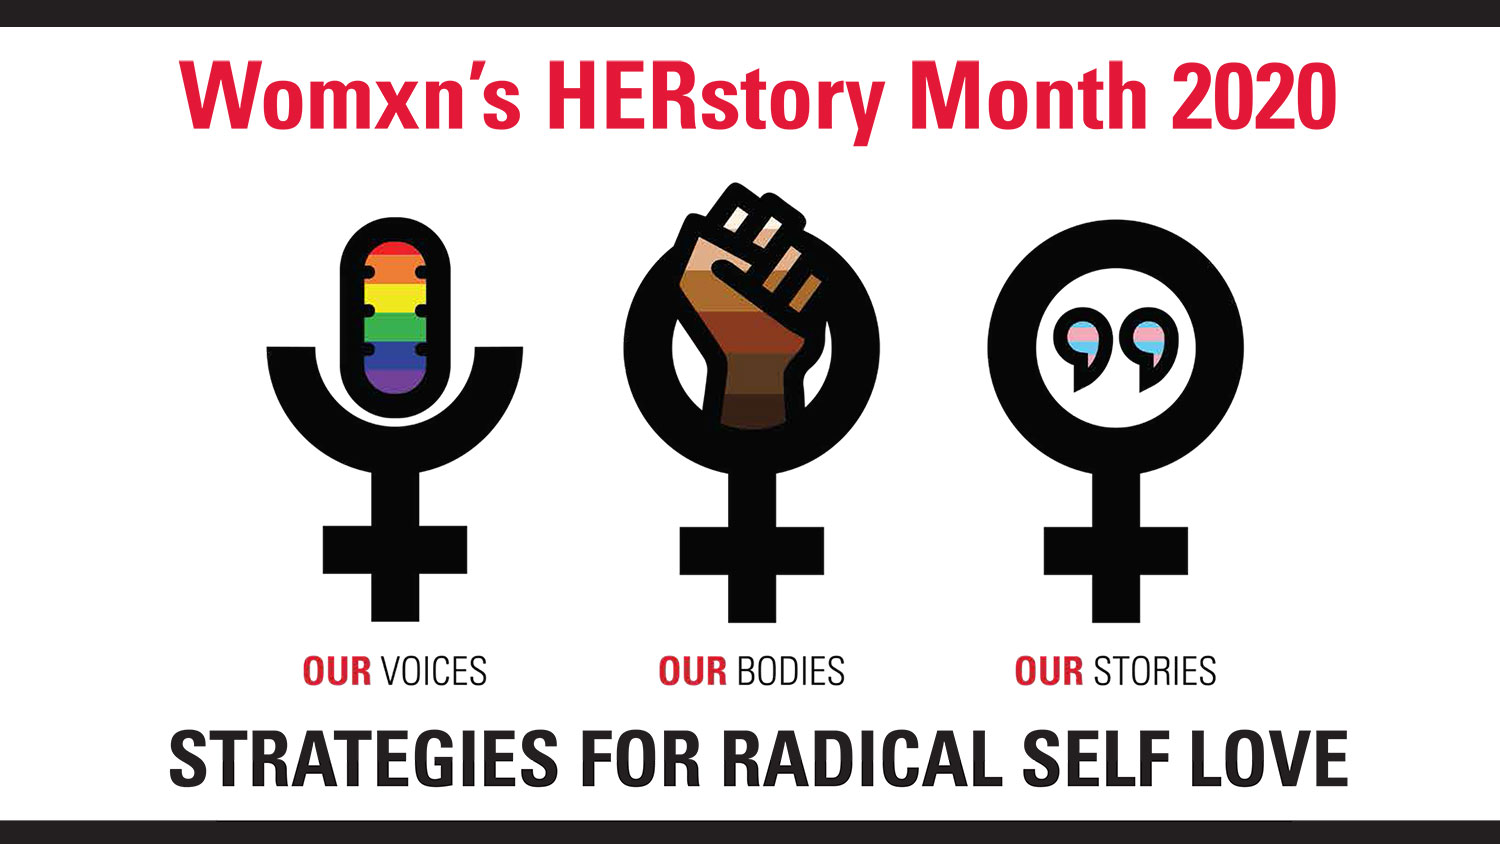 Womxn's Herstory Month 2020